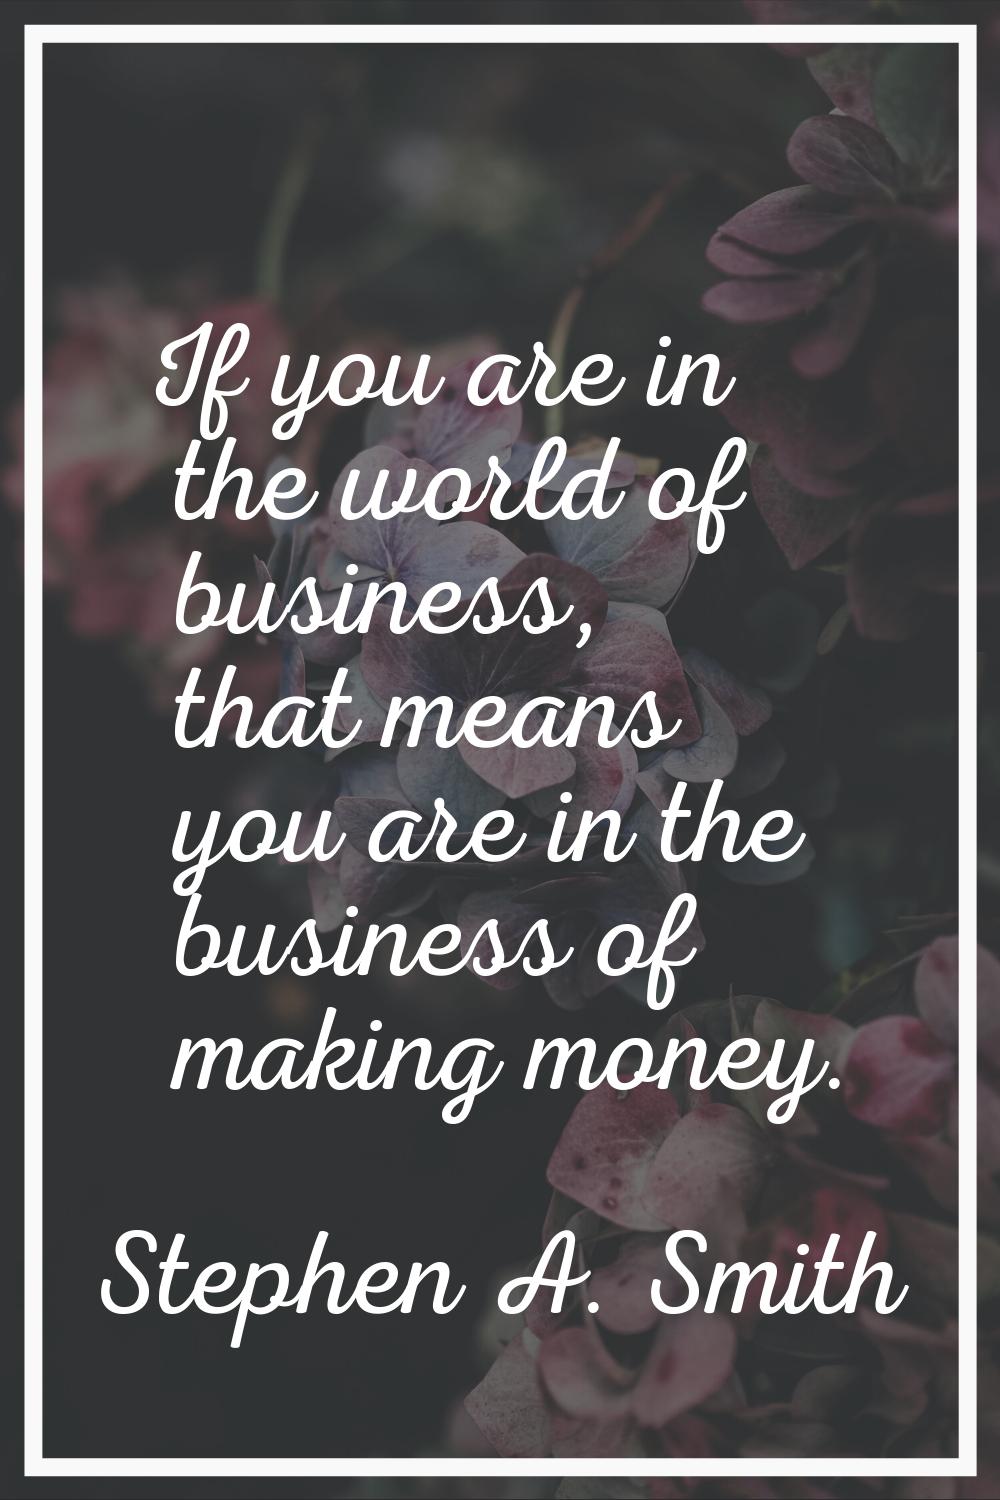 If you are in the world of business, that means you are in the business of making money.